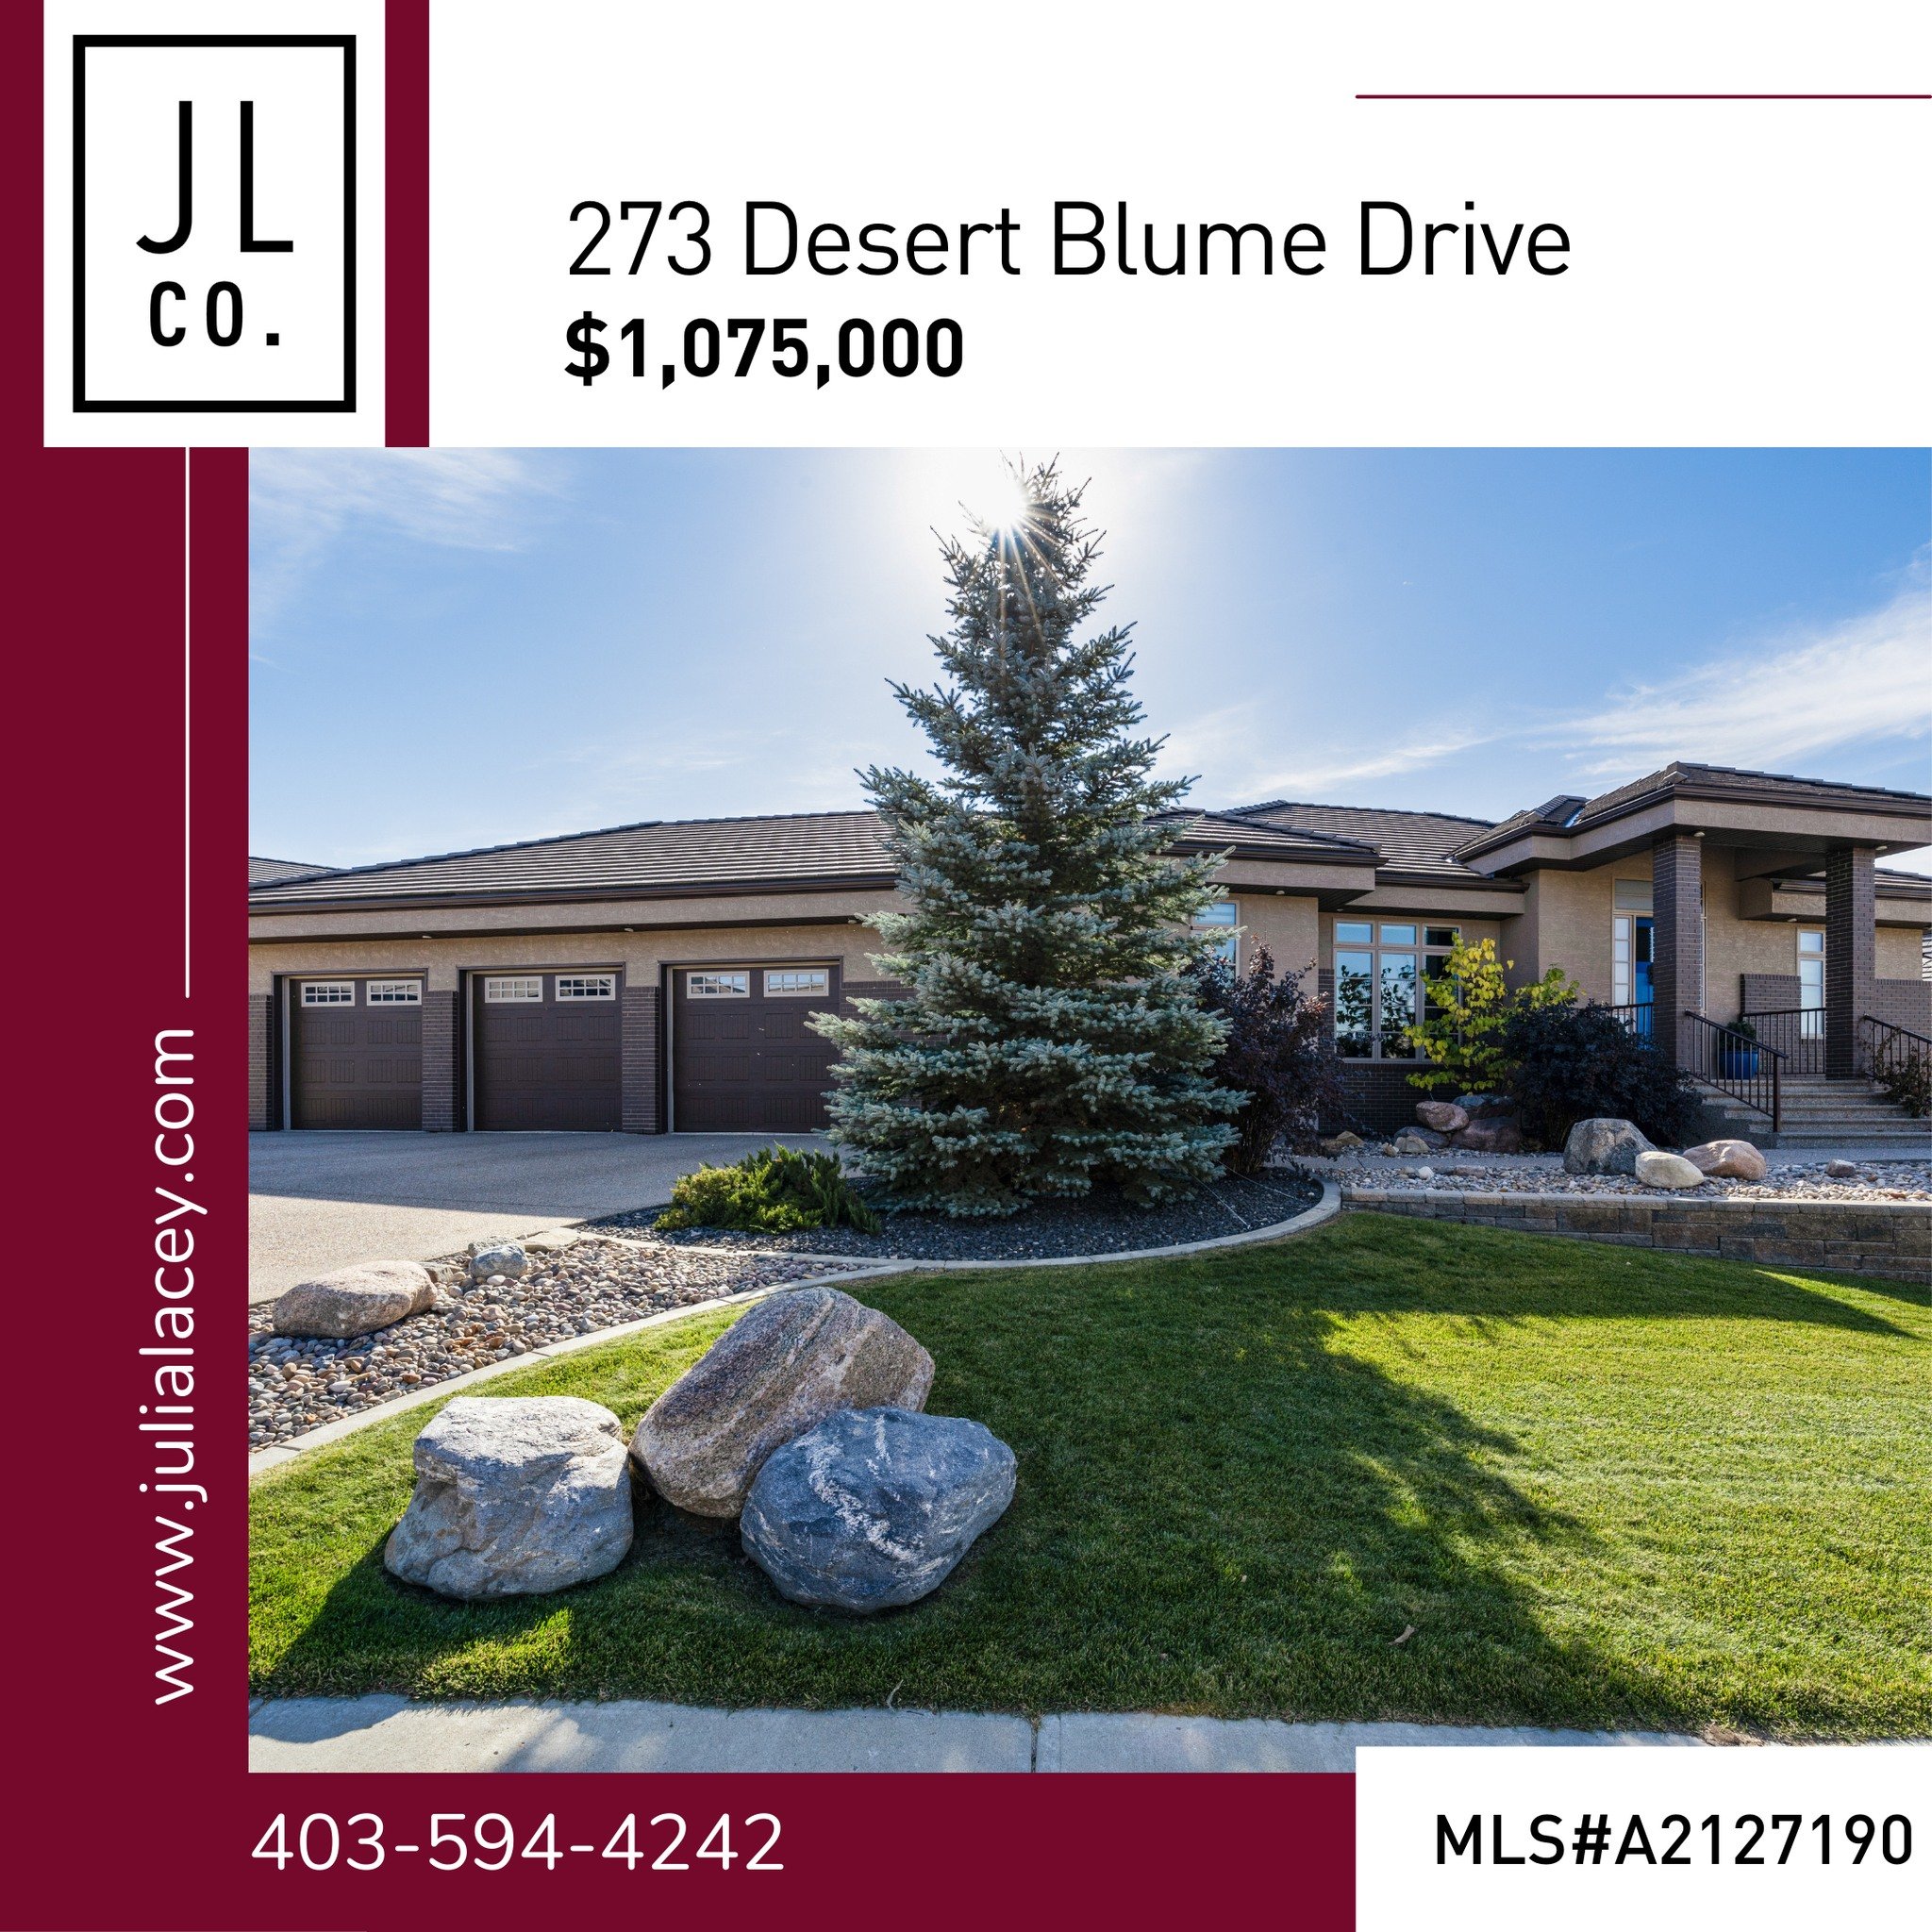 🏡 Luxurious Living in Desert Blume!  This stunning 3-bedroom, 2.5-bathroom executive walkout bungalow is a home you'll love coming home to. Custom hickory floors, a breathtaking fireplace with a 100-year-old Montana wood mantle, and a dream kitchen 